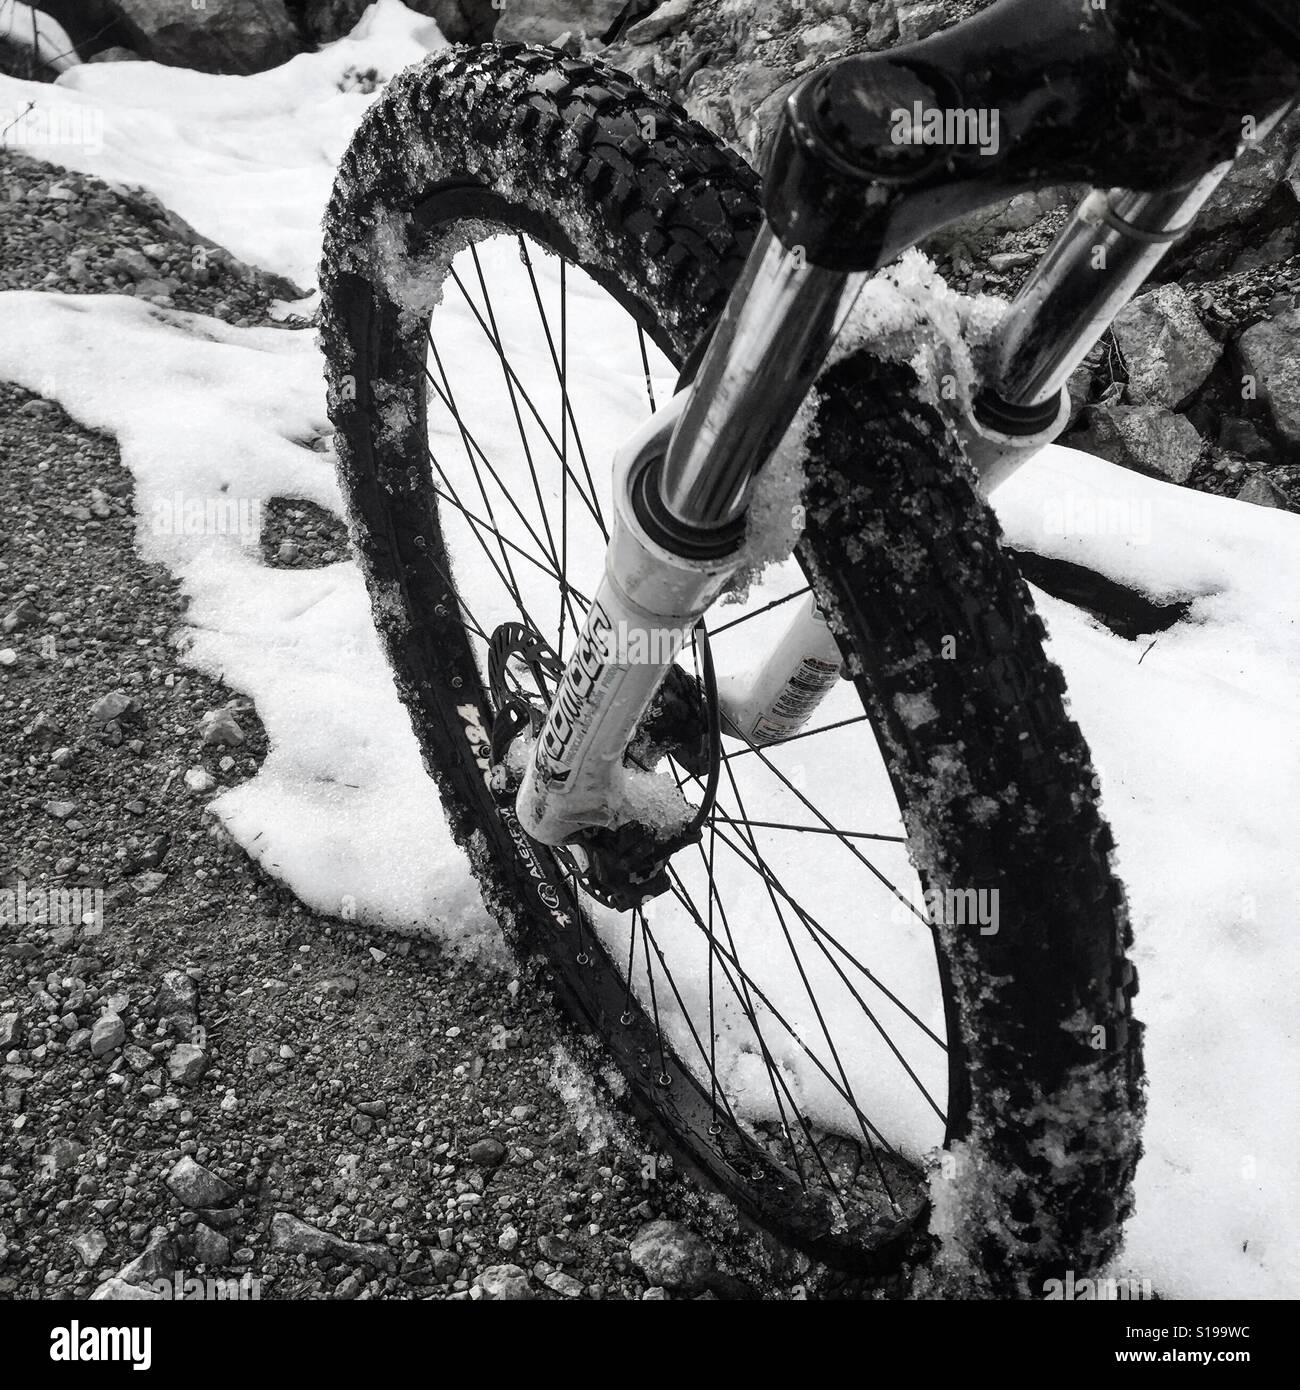 Snowy Mountain Biking Bliss Banque D'Images